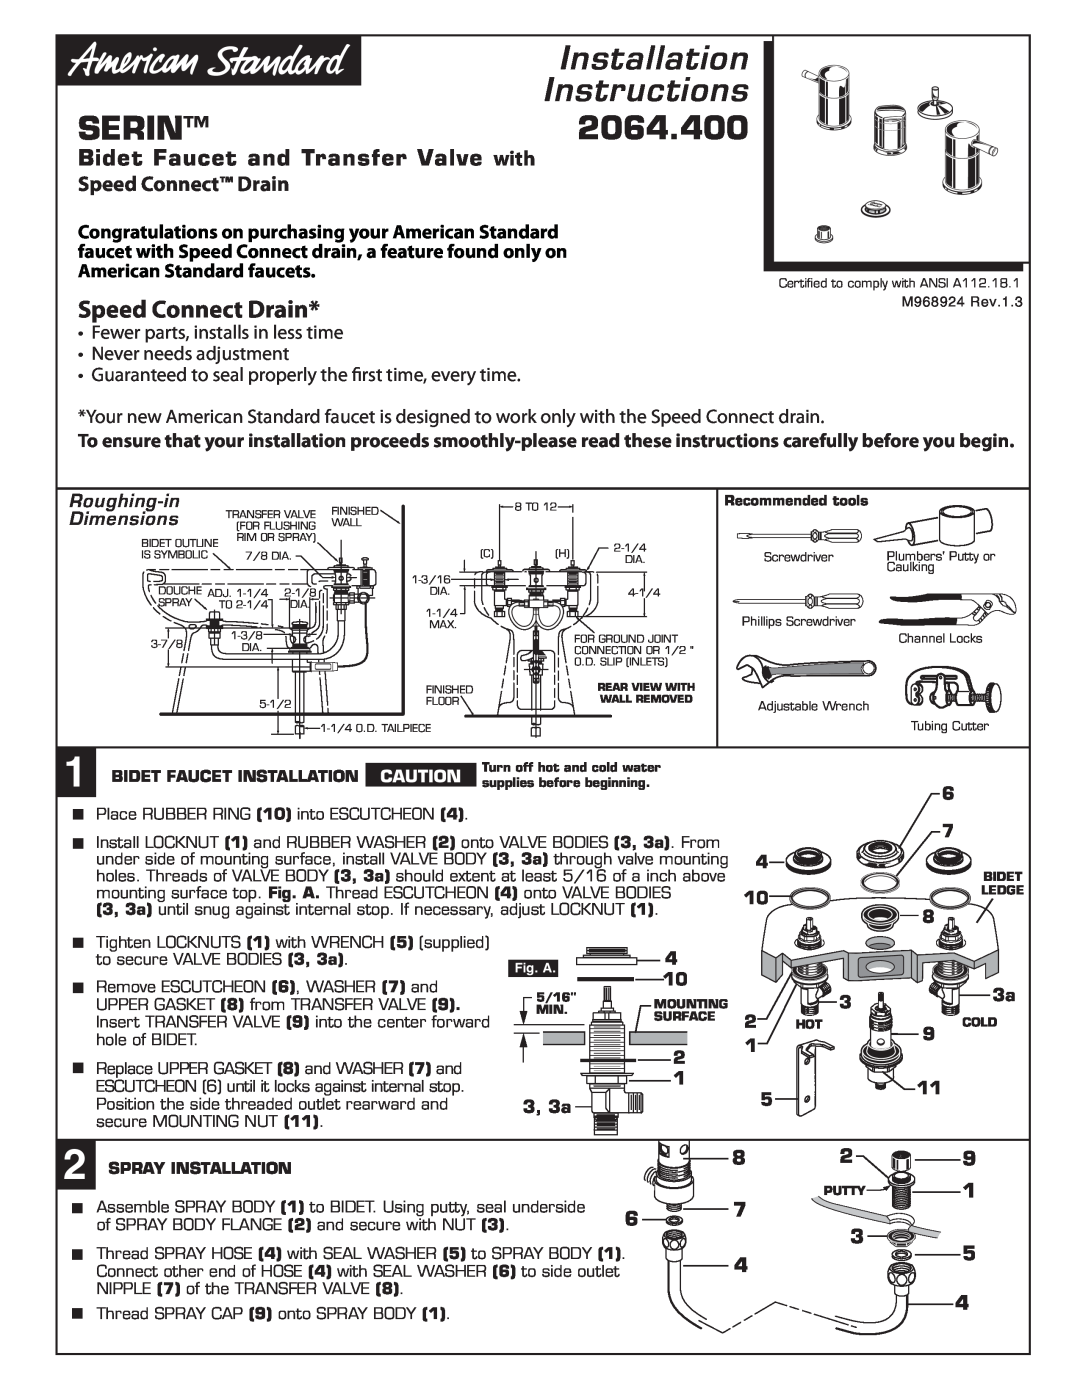 American Standard installation instructions Serin, 2064.400, Speed Connect Drain, Bidet Faucet and Transfer Valve with 